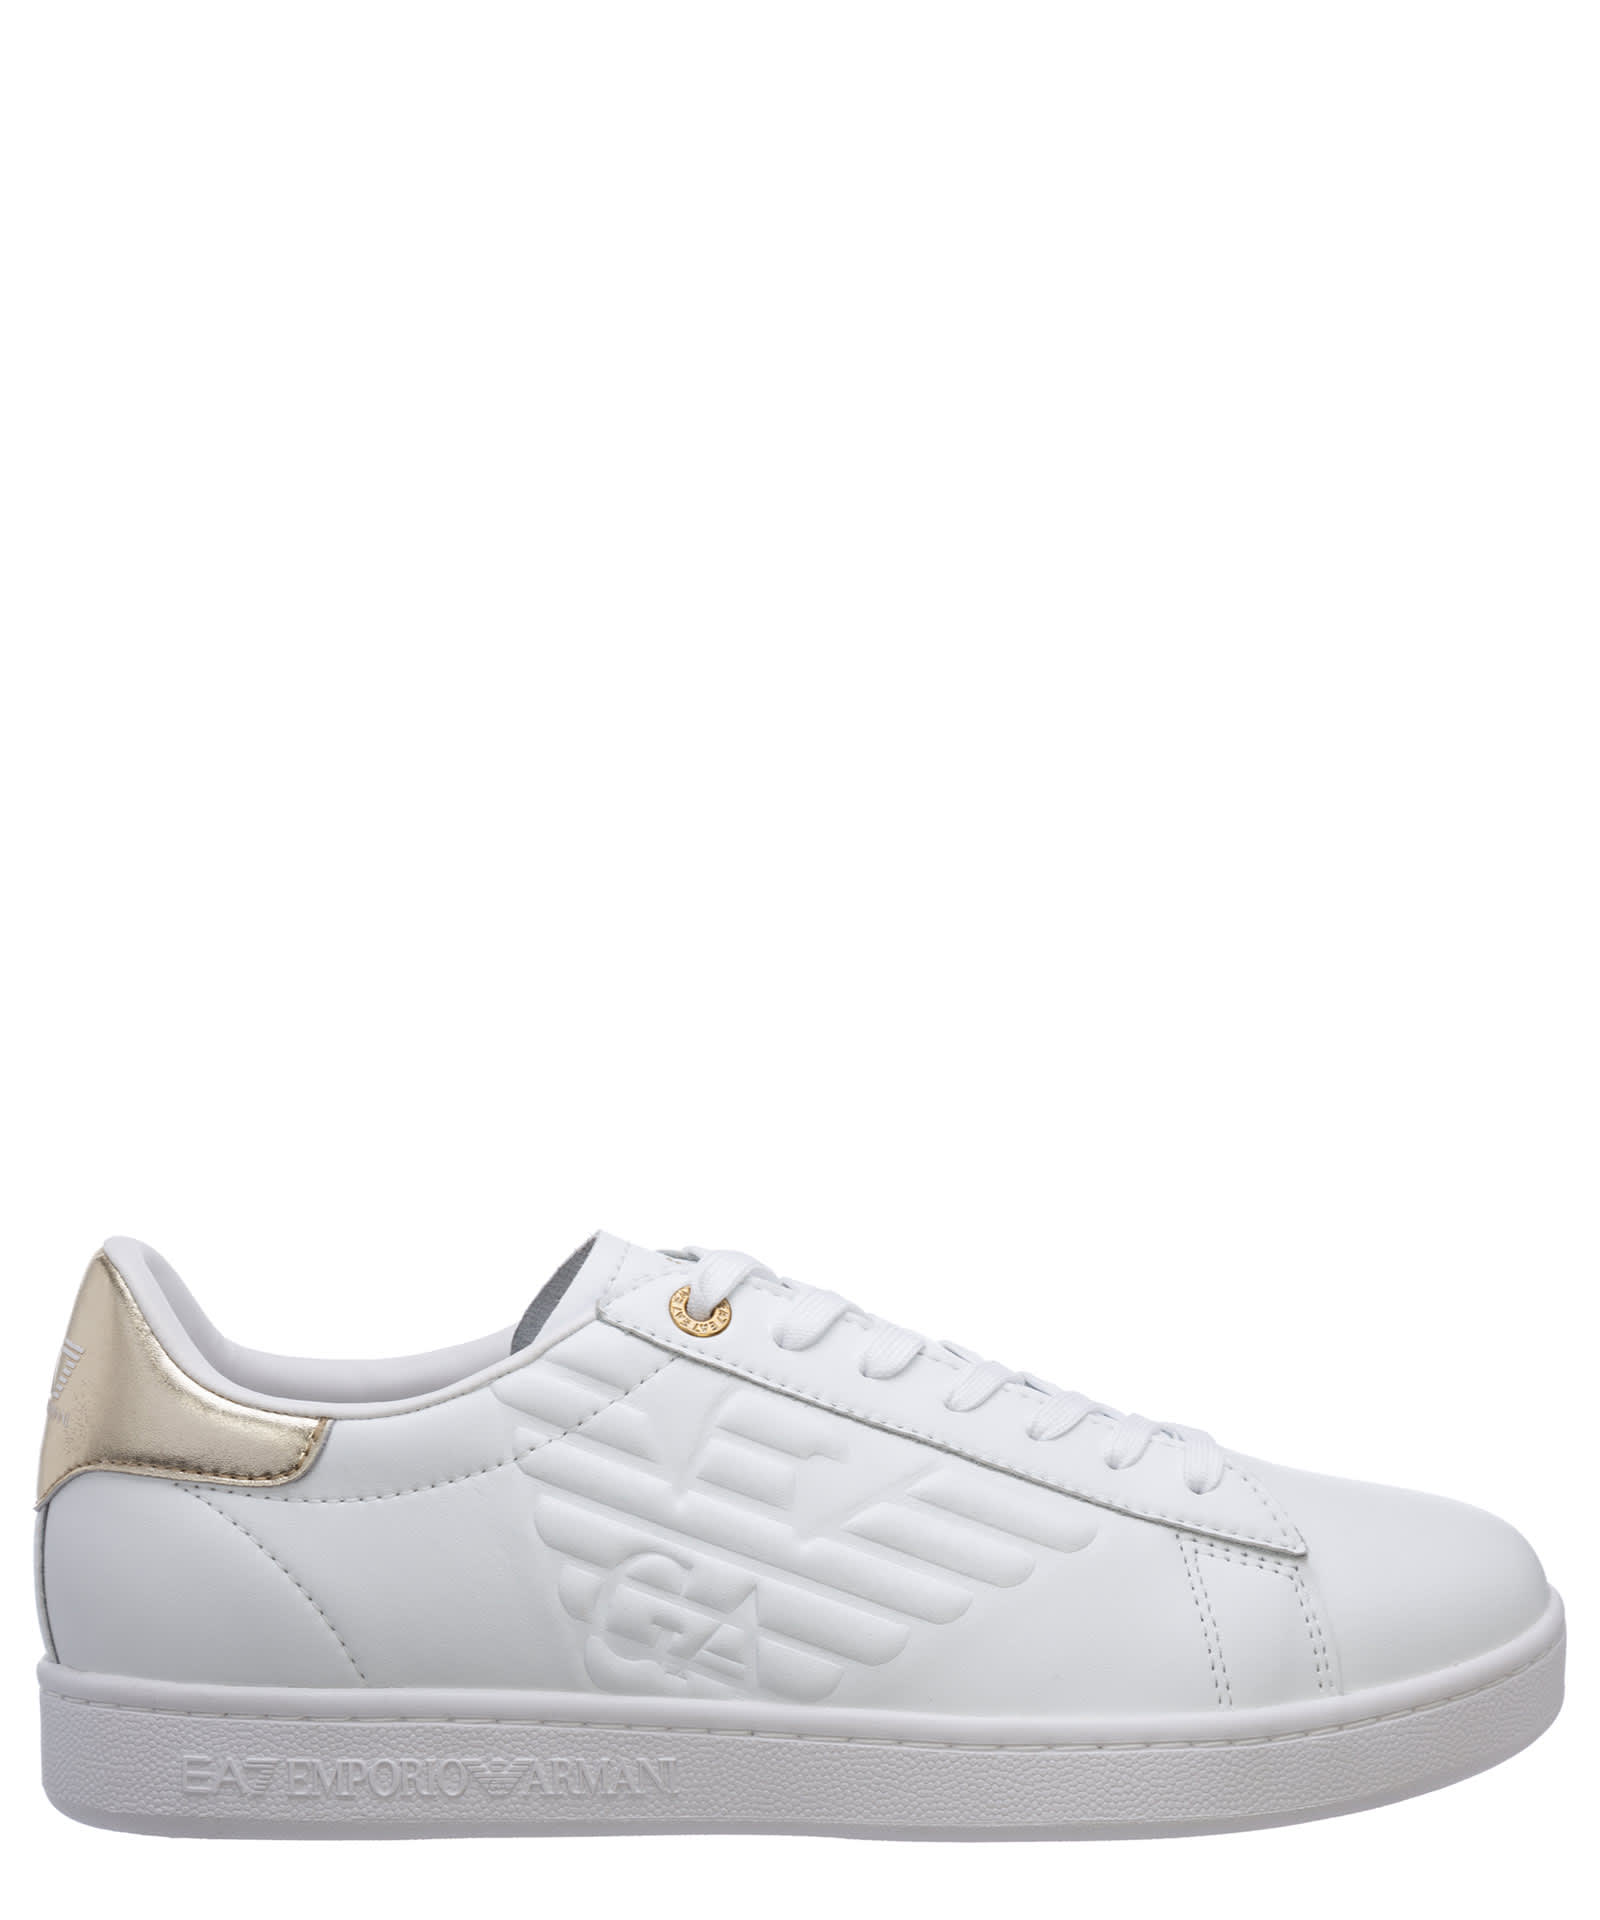 EA7 CLASSIC CC LEATHER SNEAKERS